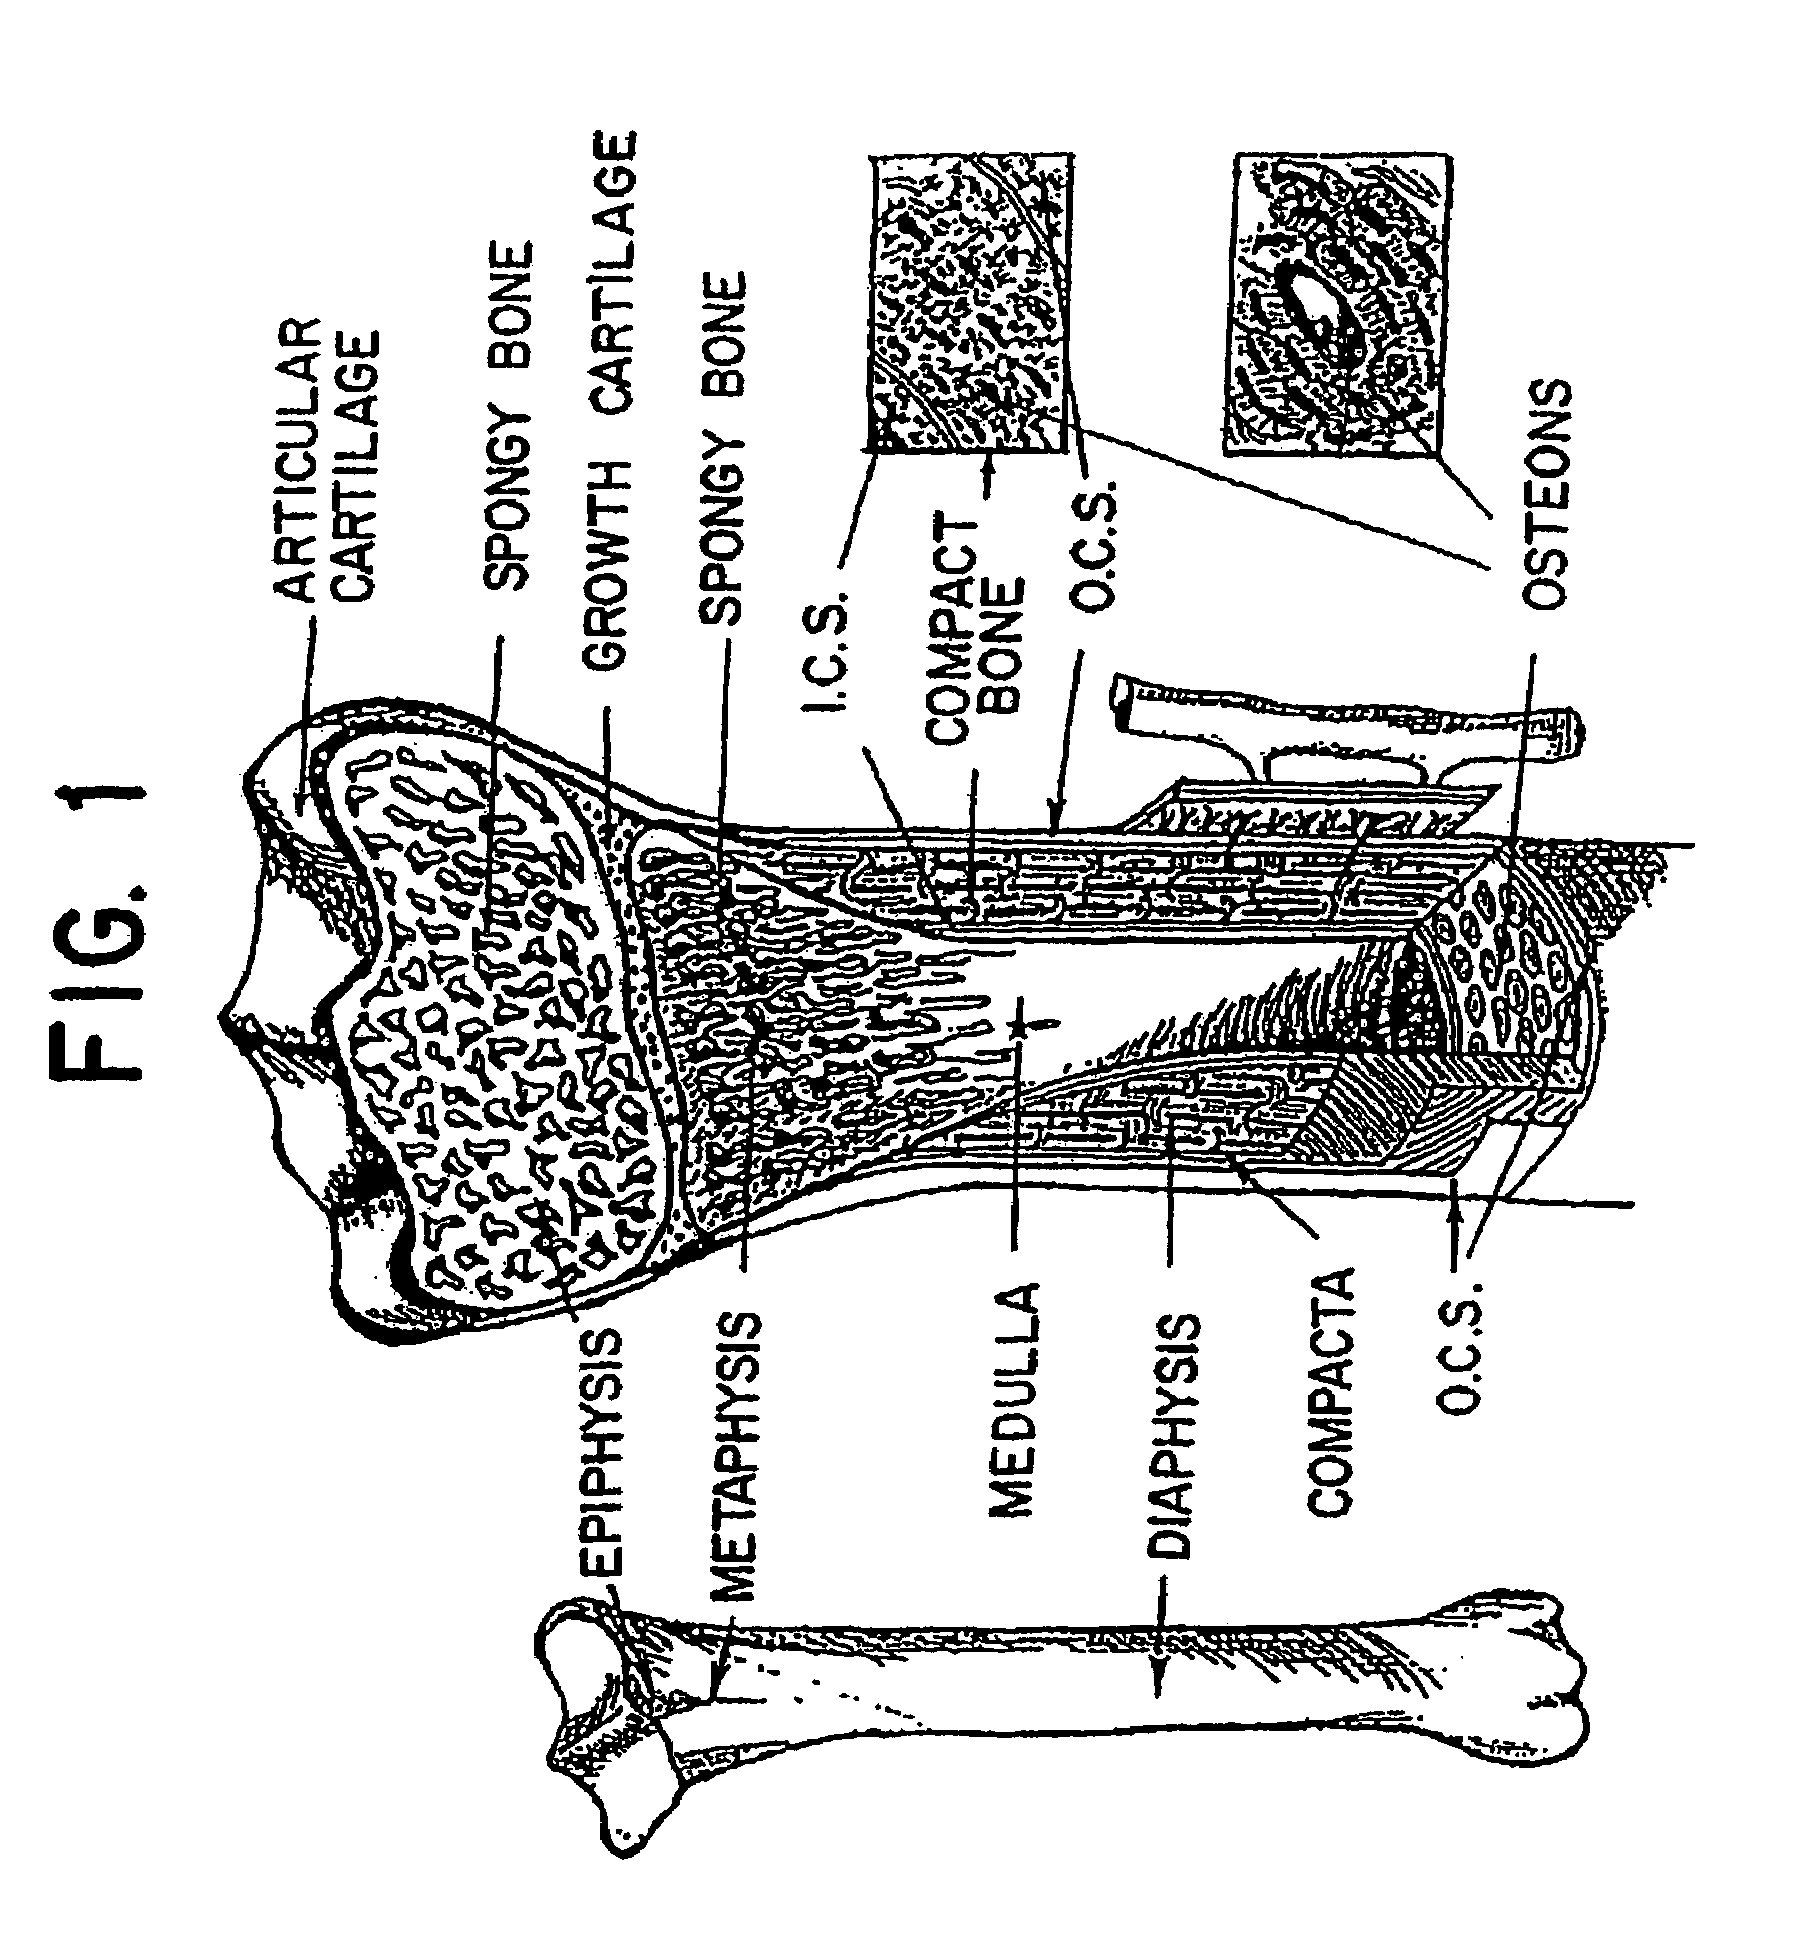 Method and system for modeling bone structure